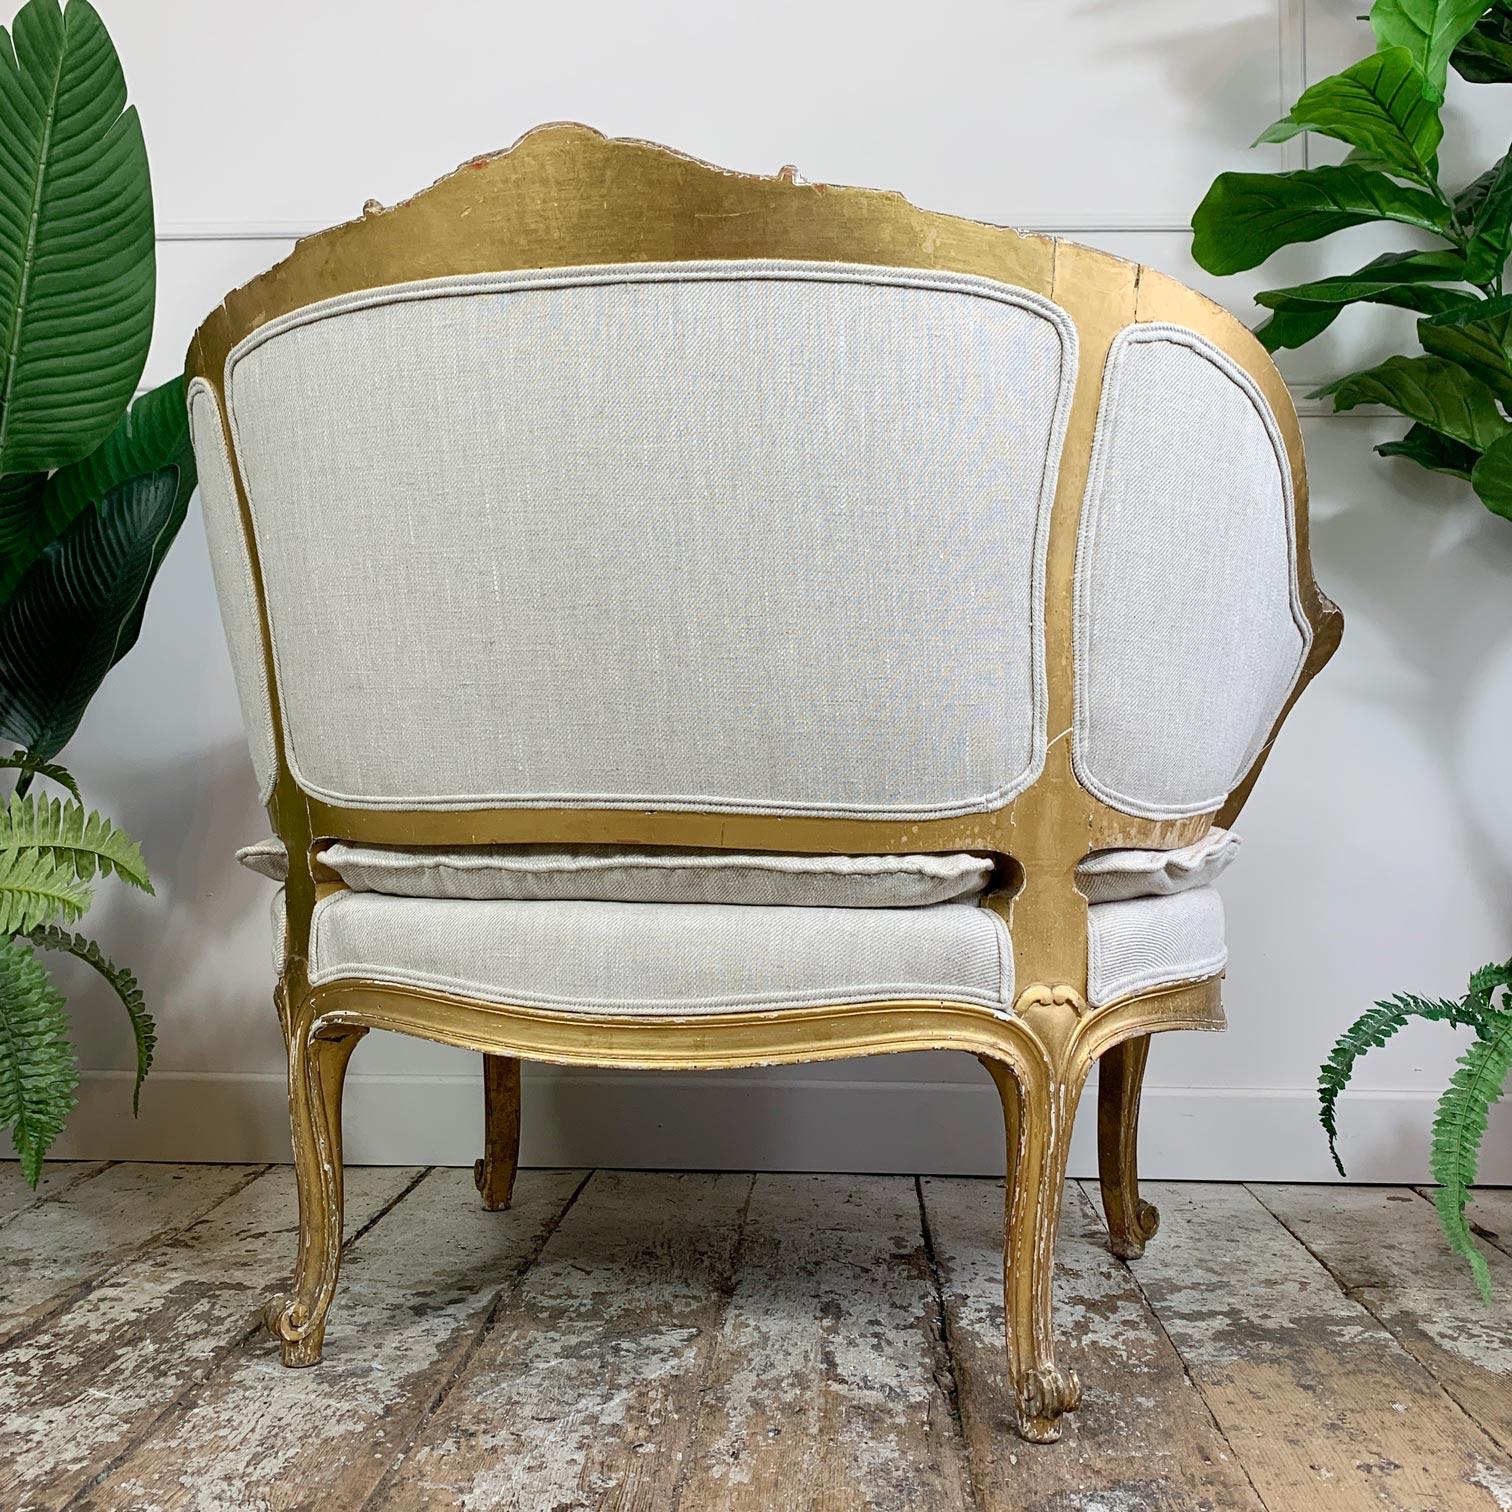 Gesso French 19th C Gilt Wood Louis XV Fauteuil Marquise Chair